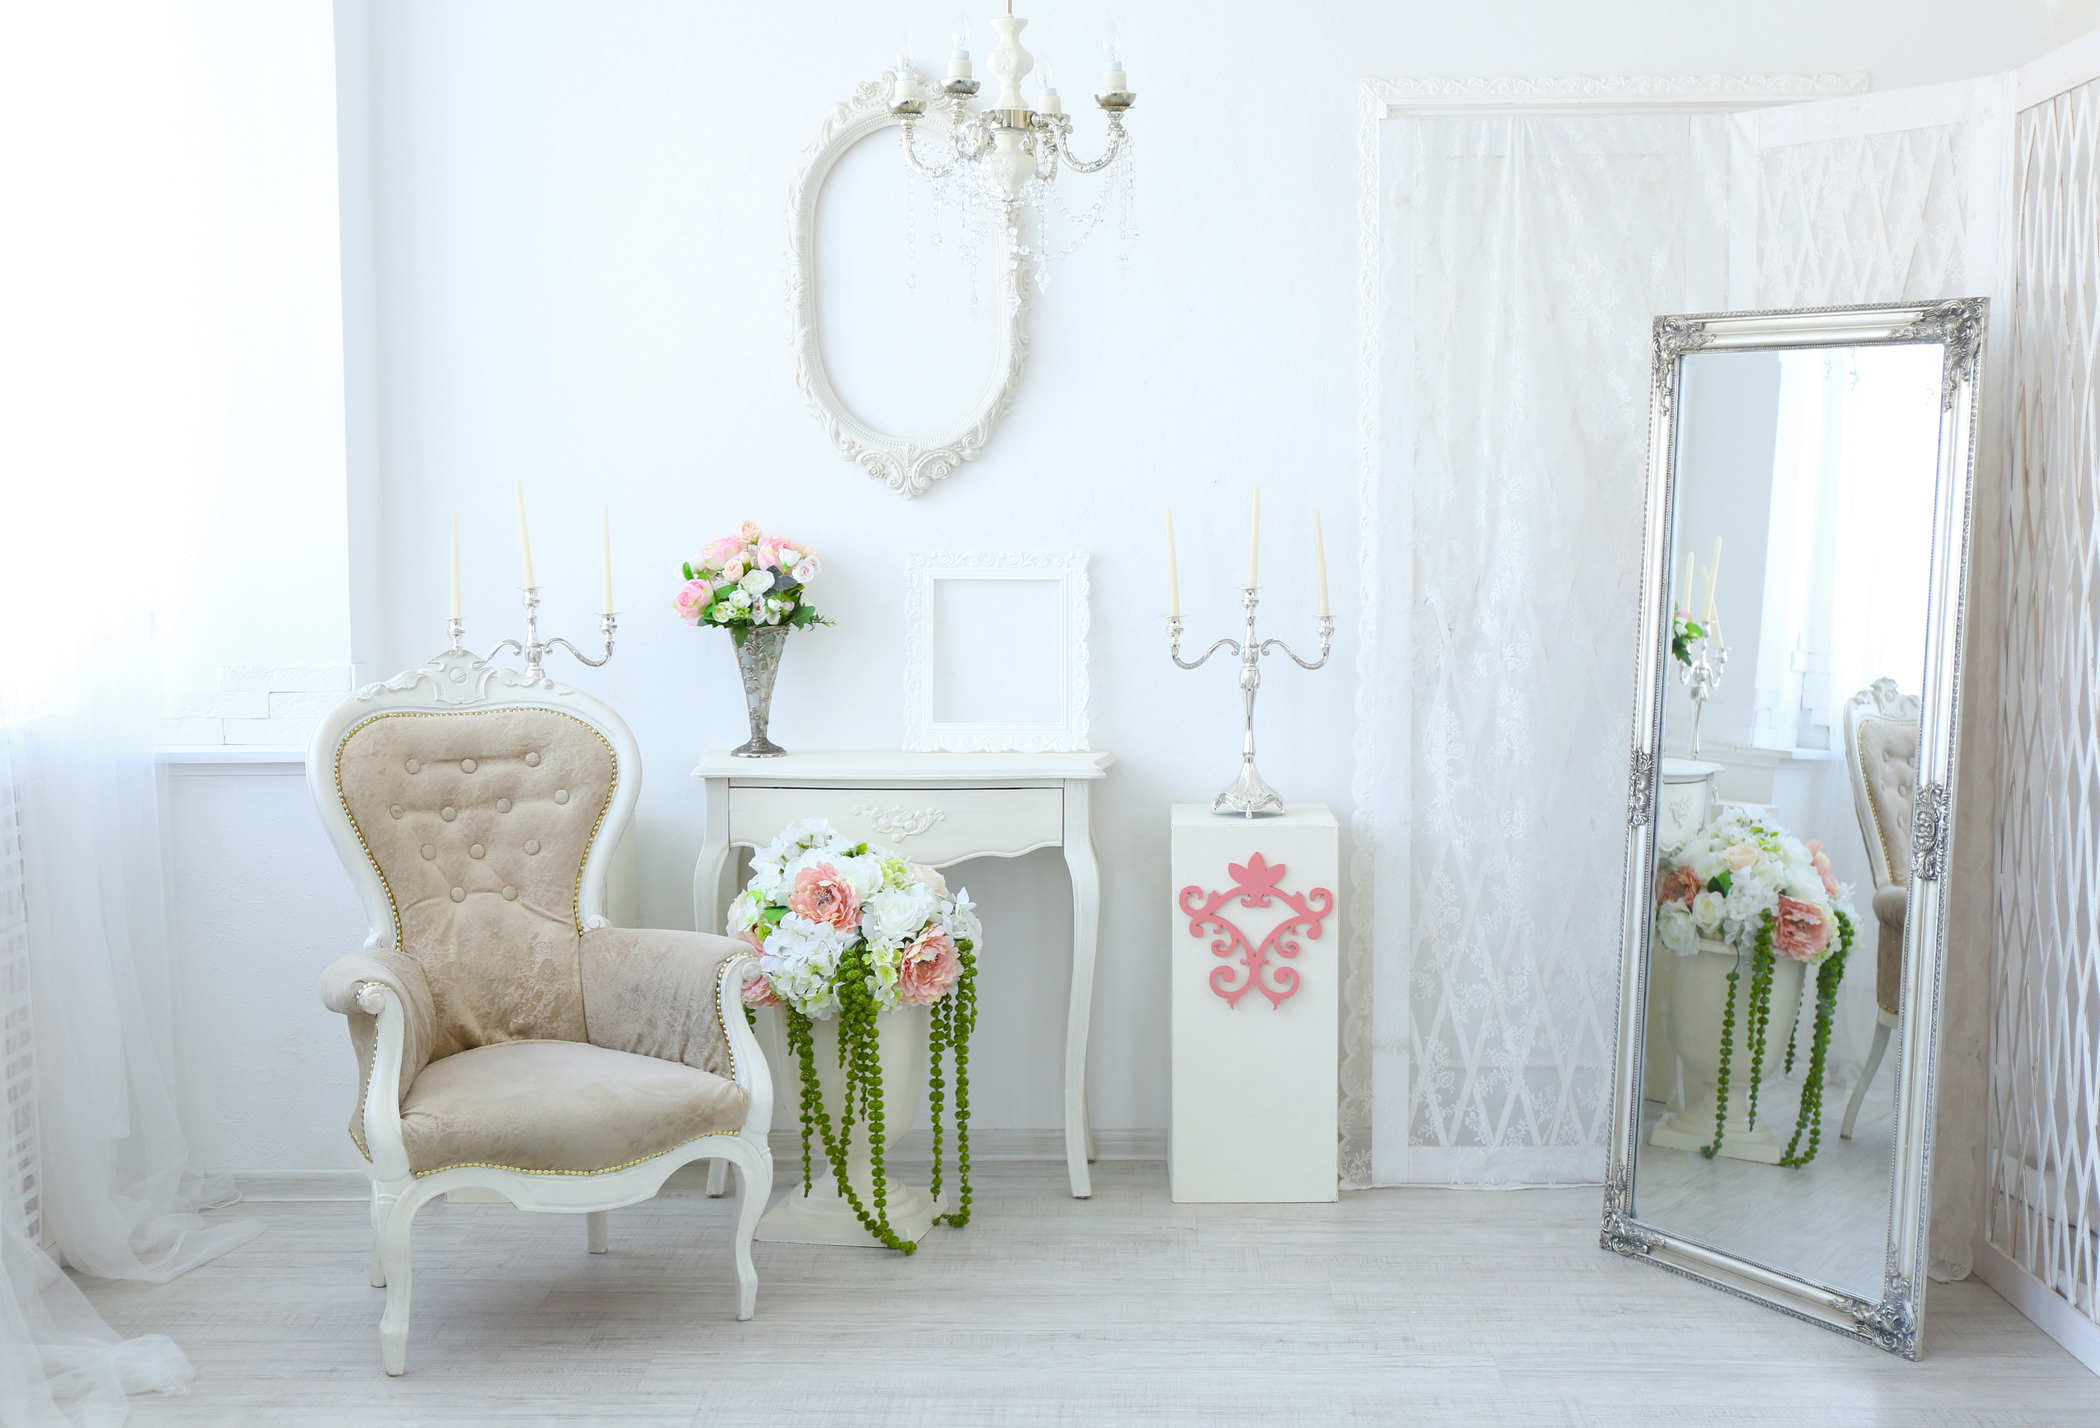 Beautiful luxury room in shabby chic style